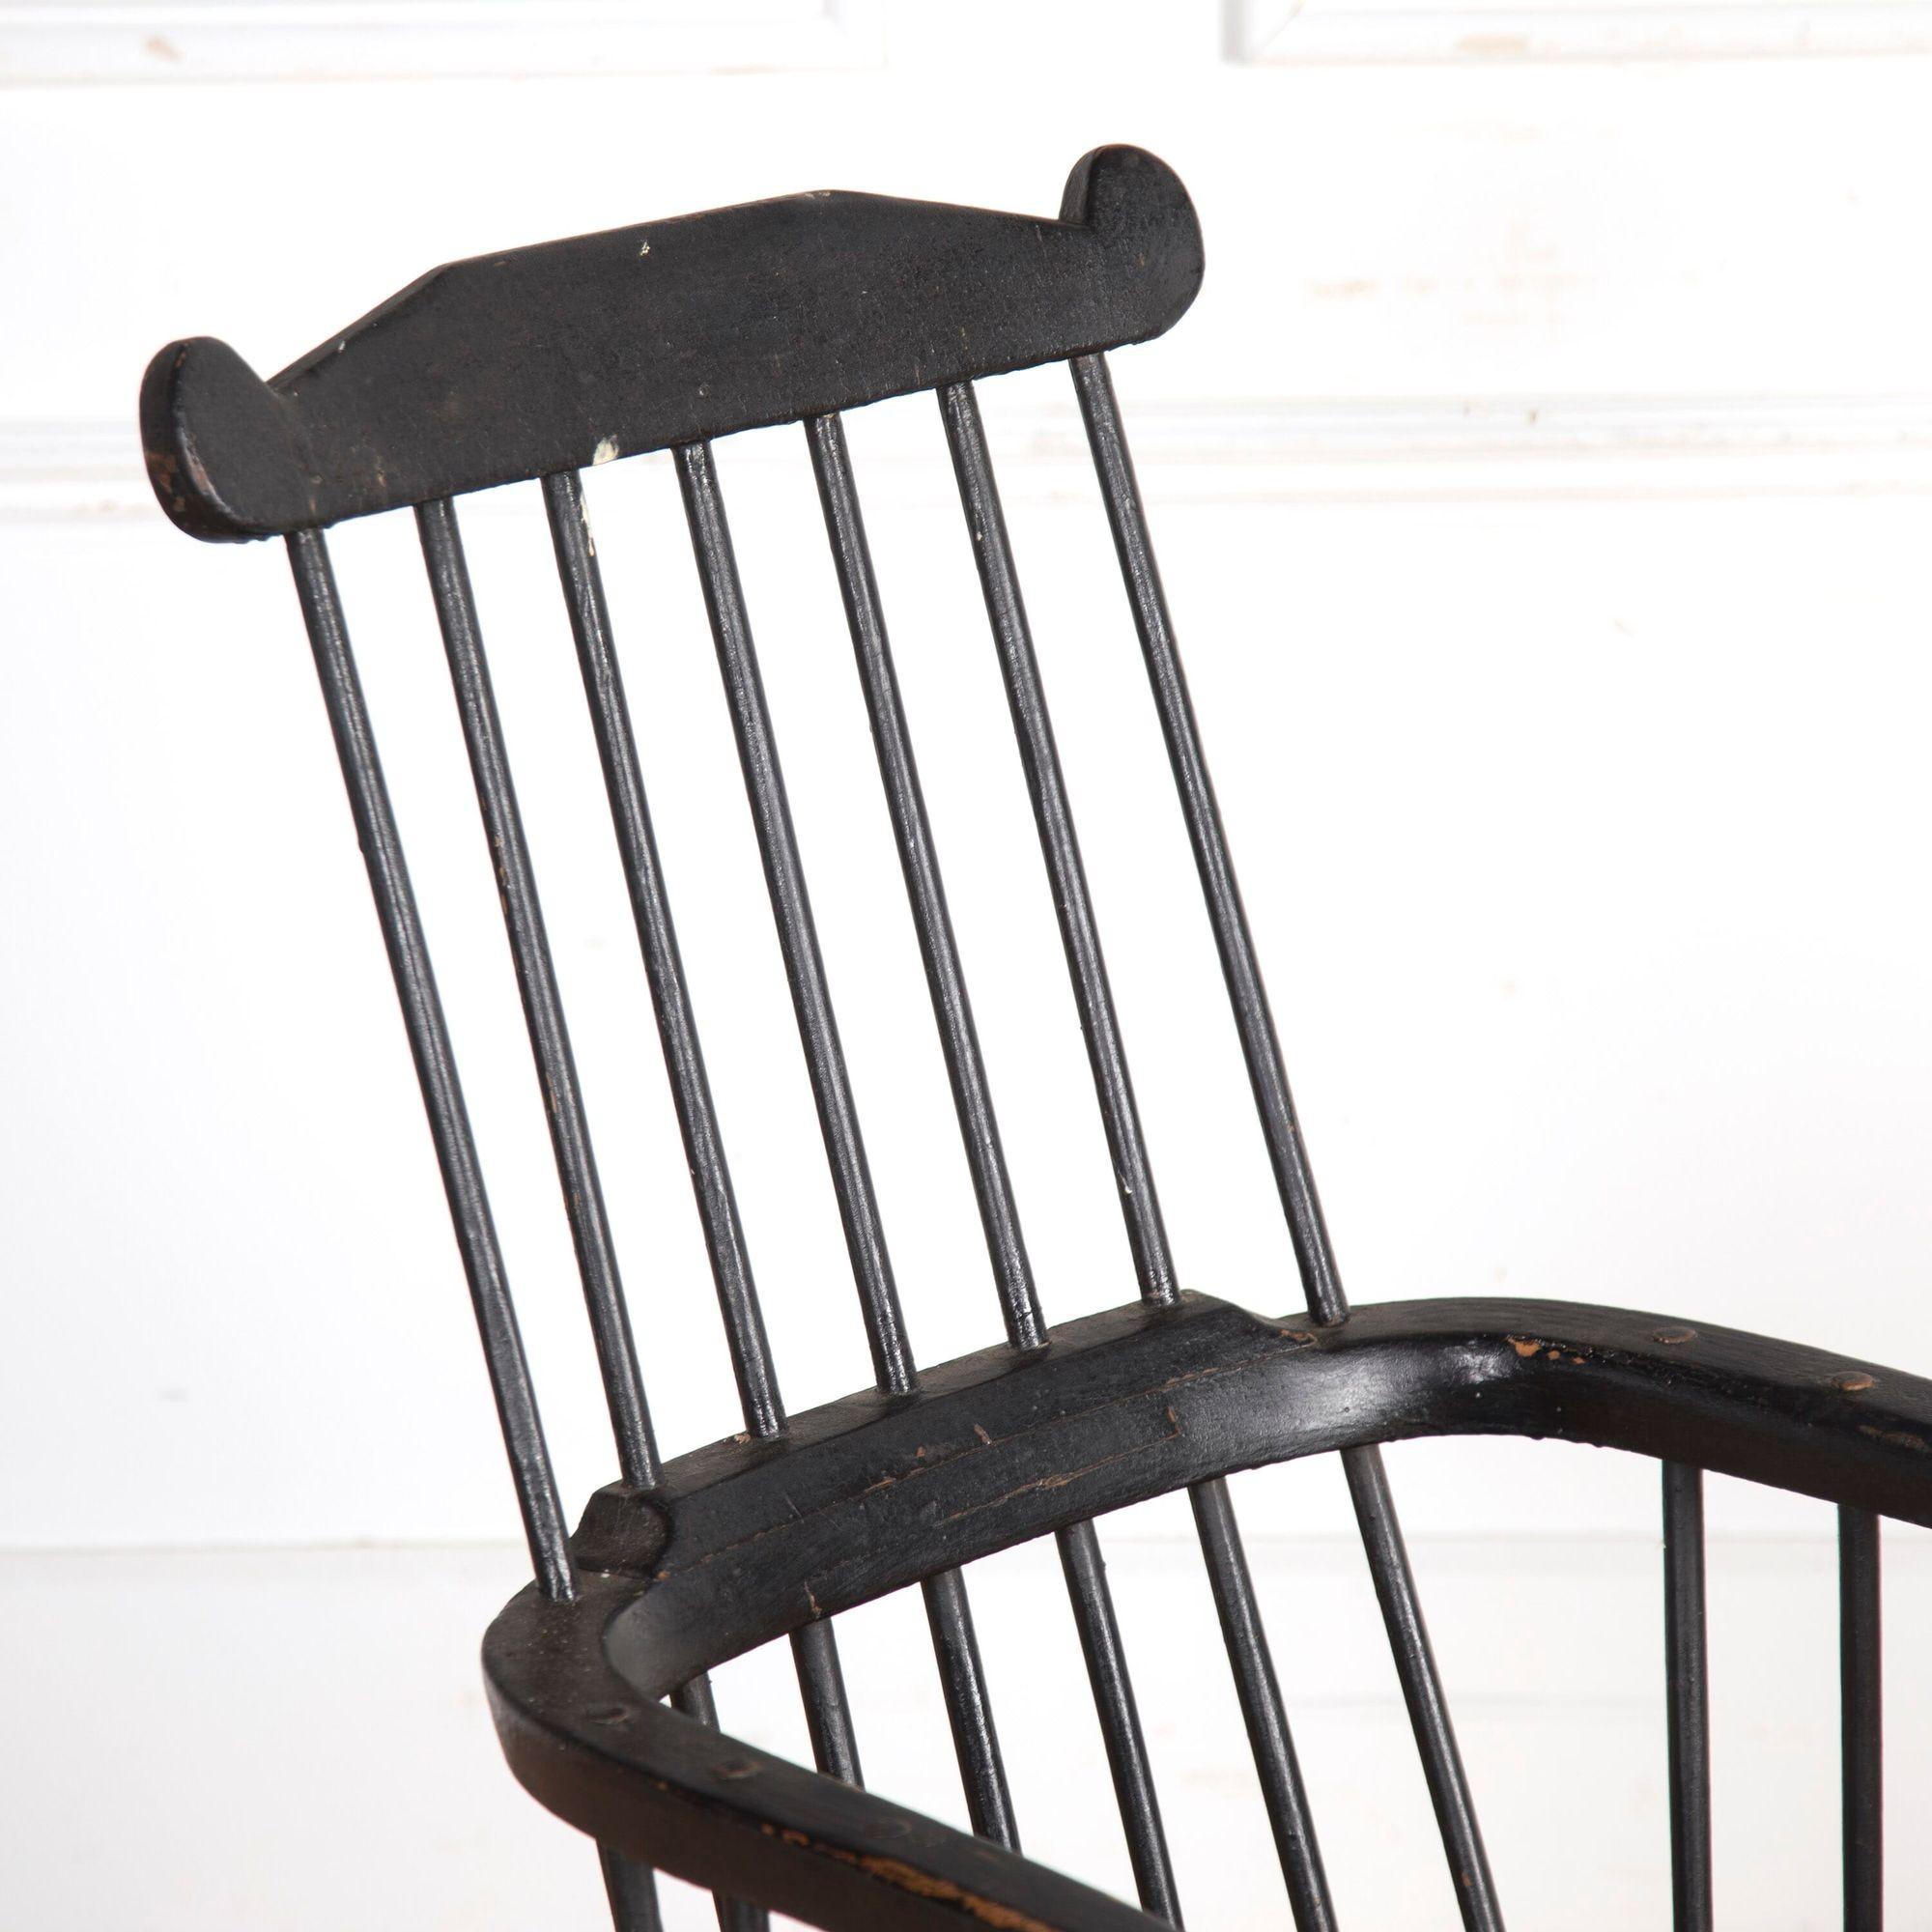 Late 18th Century Welsh comb-back stick chair from Cardiganshire.
This chair originates from the coastal town of Aberaeron in West Wales. With a wonderful time-worn black painted finish with good wear and patina.
Circa 1800.